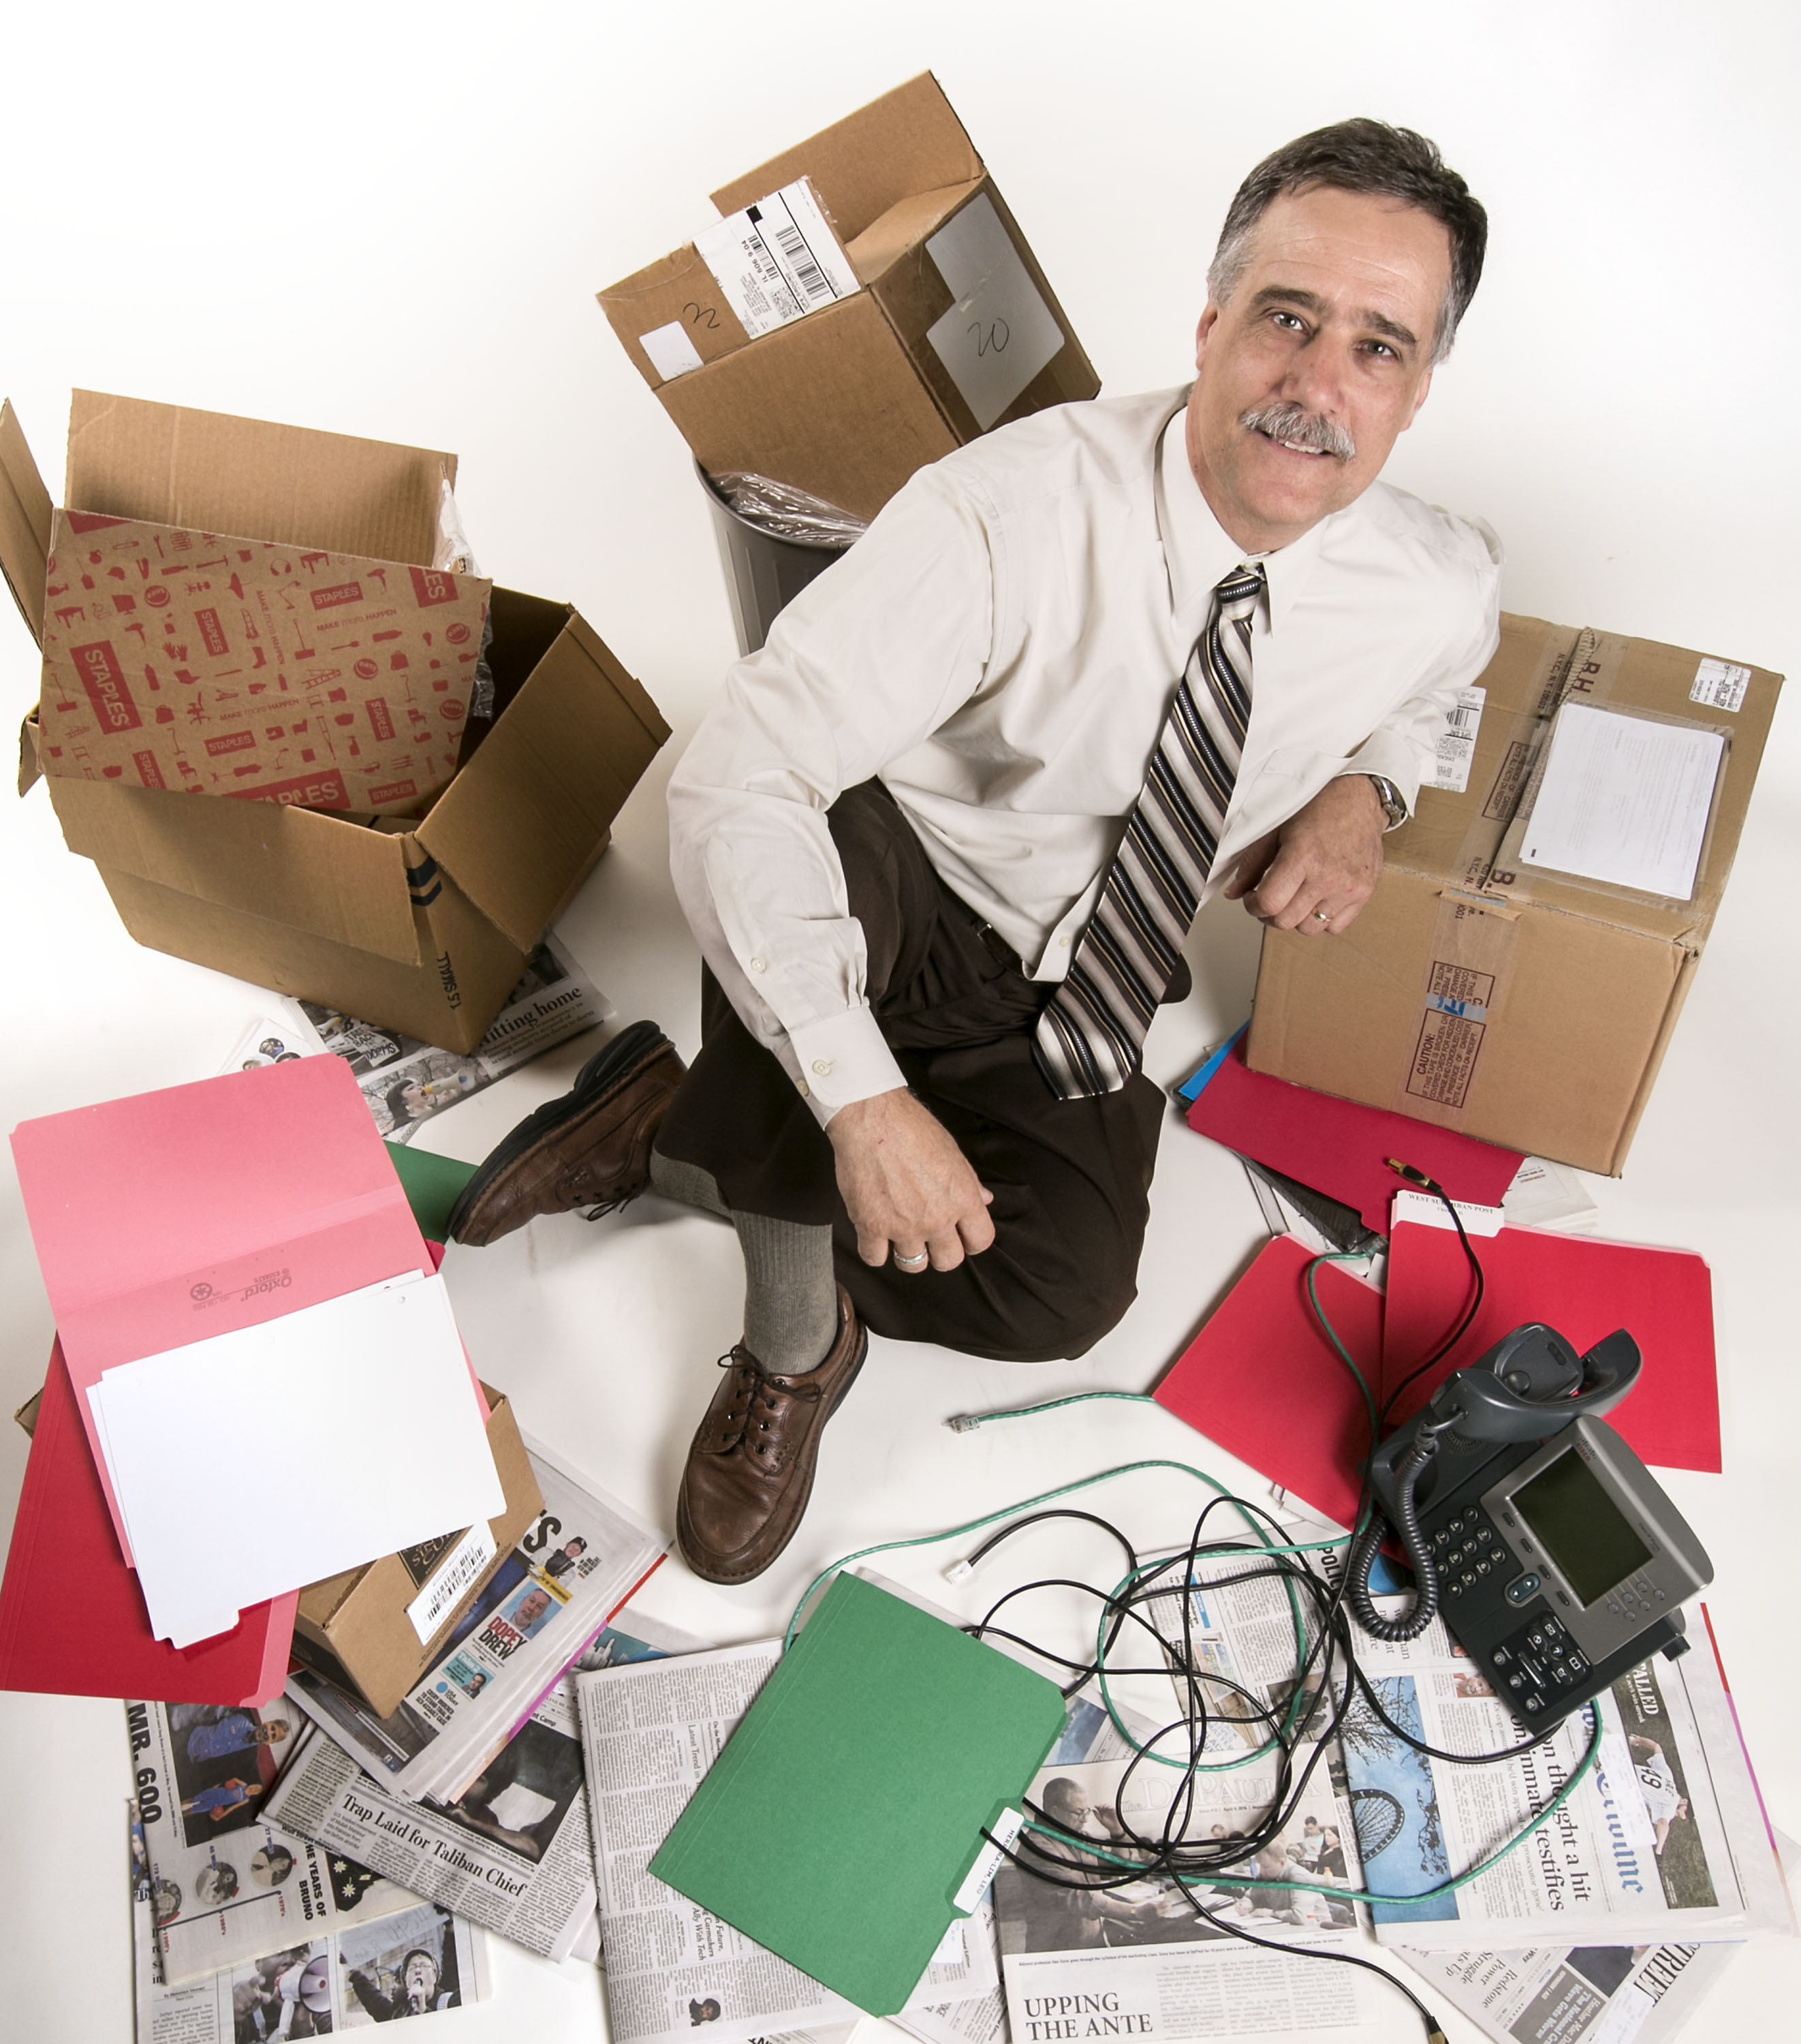 Joseph Ferrari, a professor of psychology at DePaul University in Chicago co-authored a study which looked at how an overabundance of possessions that collectively create chaotic and disorderly living spaces. “It’s the danger of clutter, the totality of one’s possessions being so overwhelming that it chips away at your well-being, relationships, and more, drowning in a sea of stuff,” Ferrari said. (DePaul University/Jamie Moncrief)